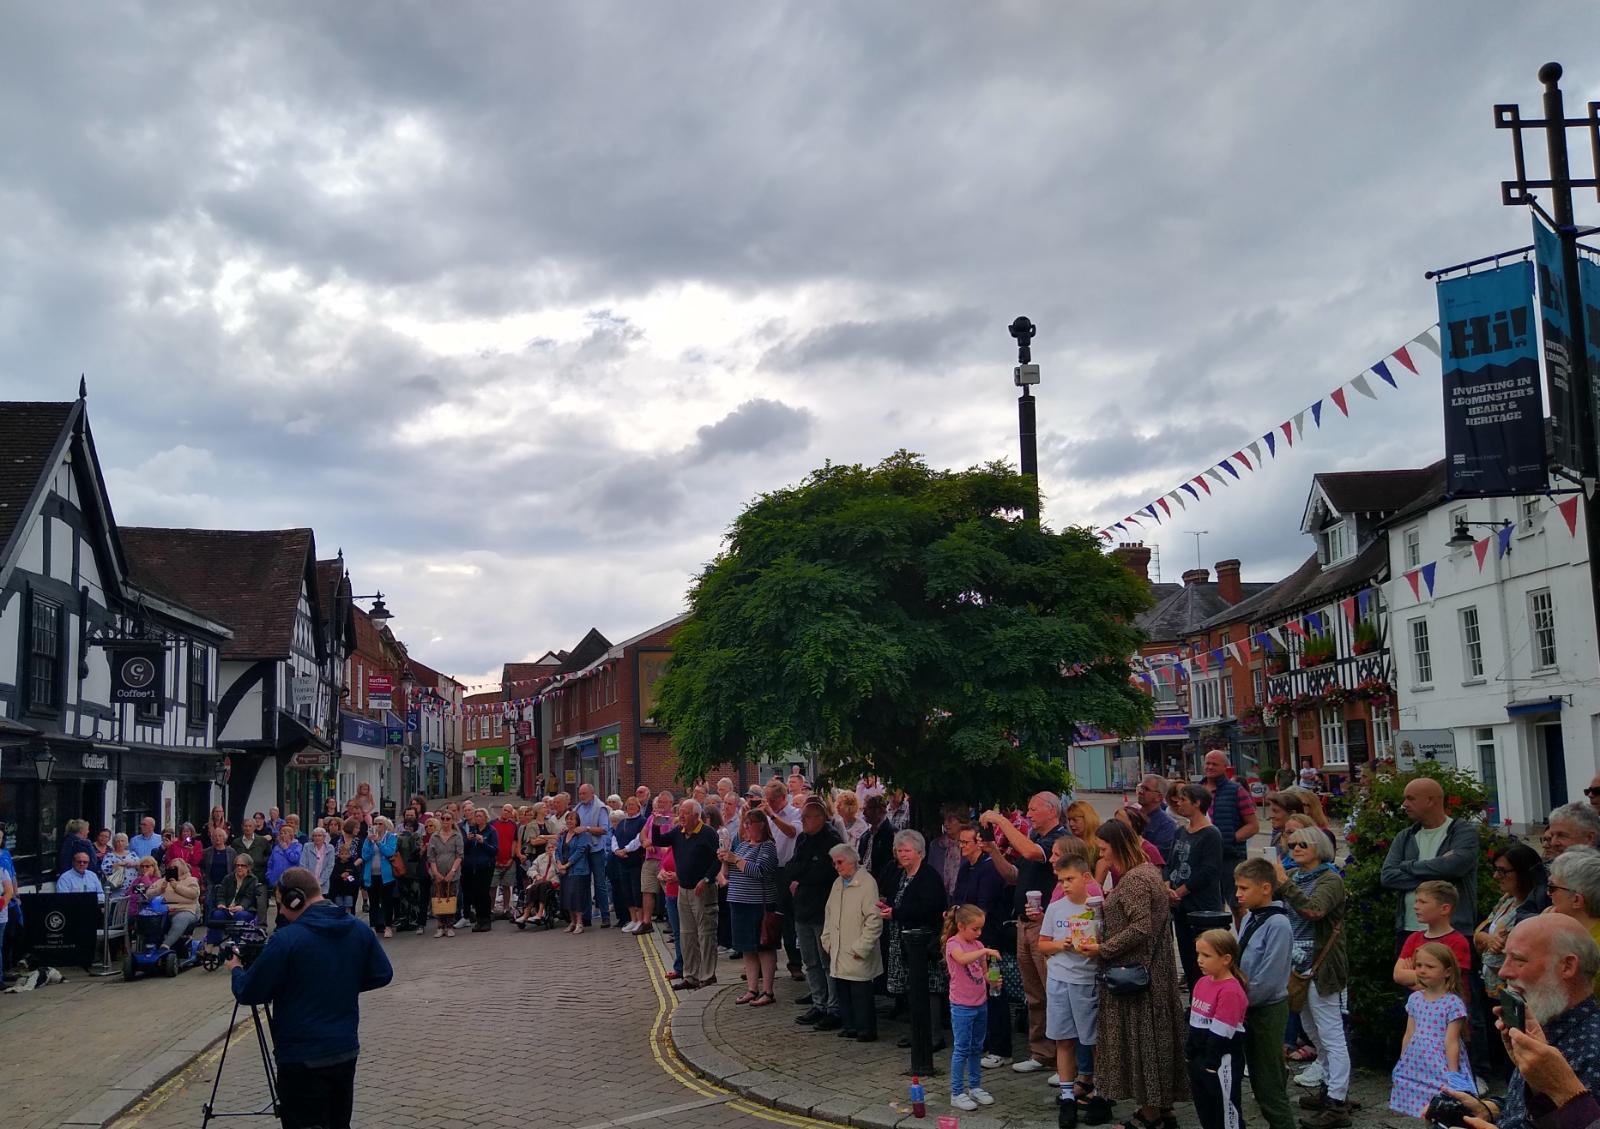 Crowds in Corn Square for the Proclamation. Picture Michael Eden